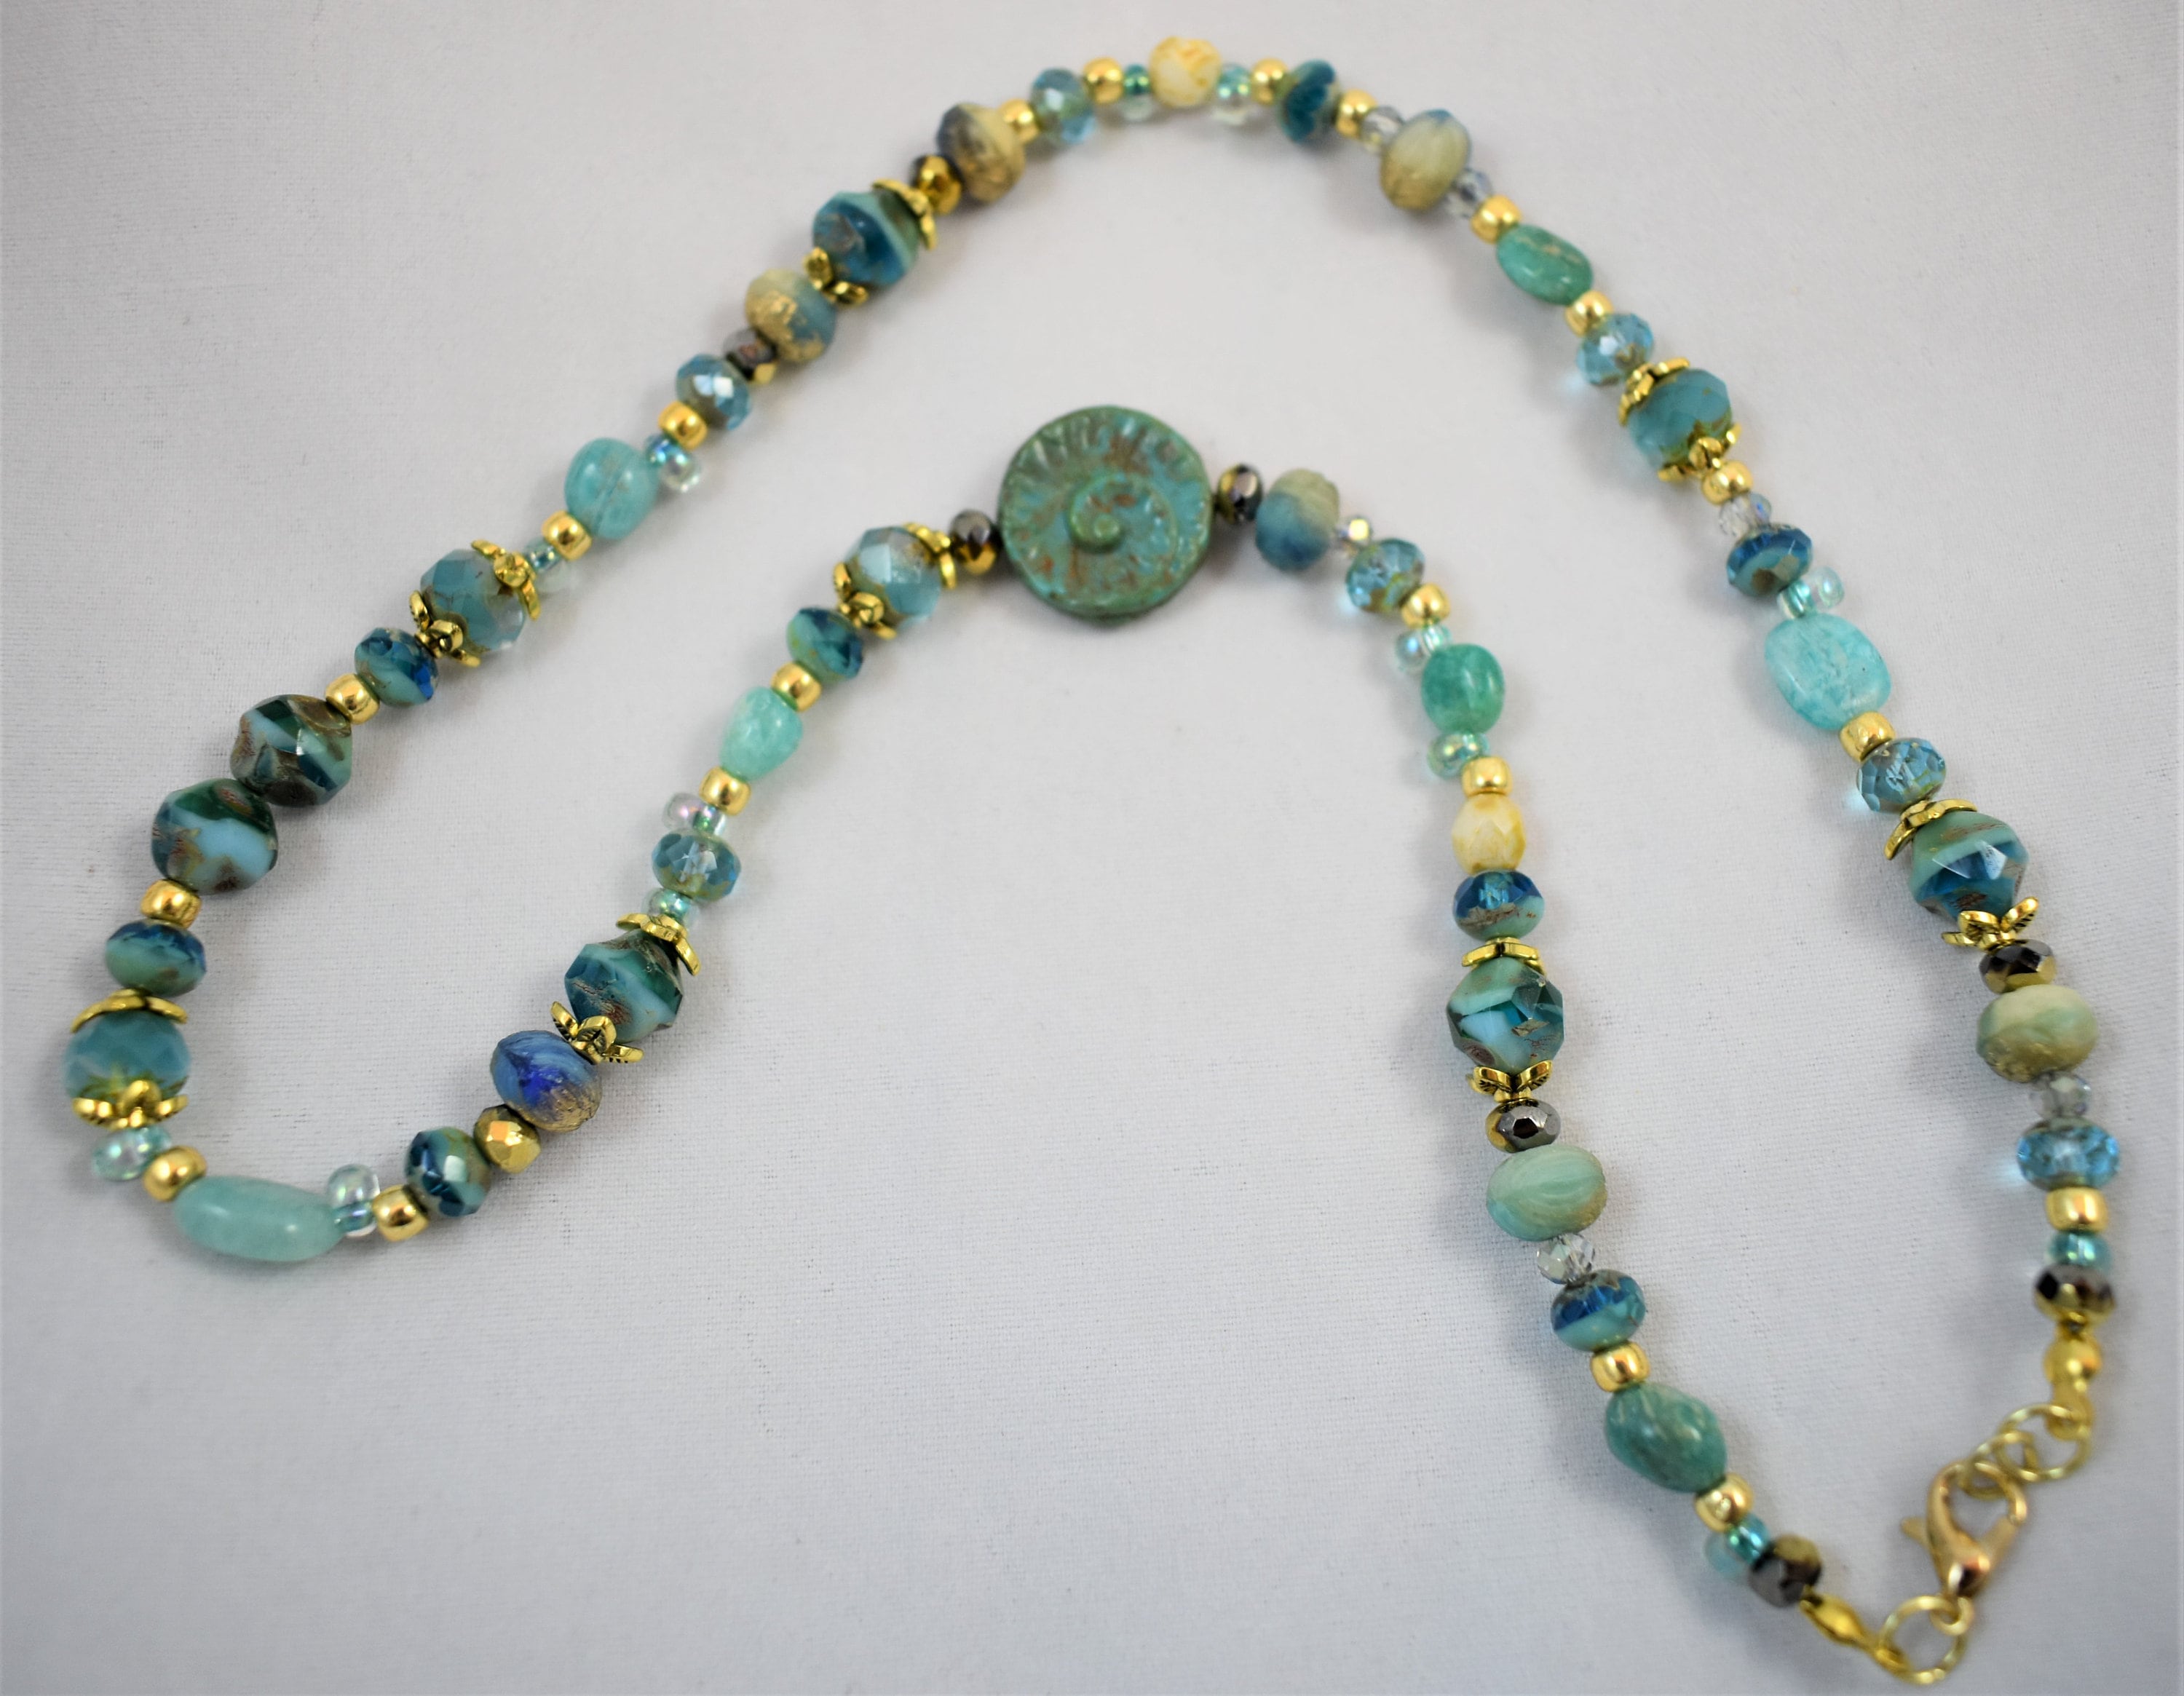 Necklace Stunning Aqua and Gold Beaded Czech Glass Necklace - Etsy